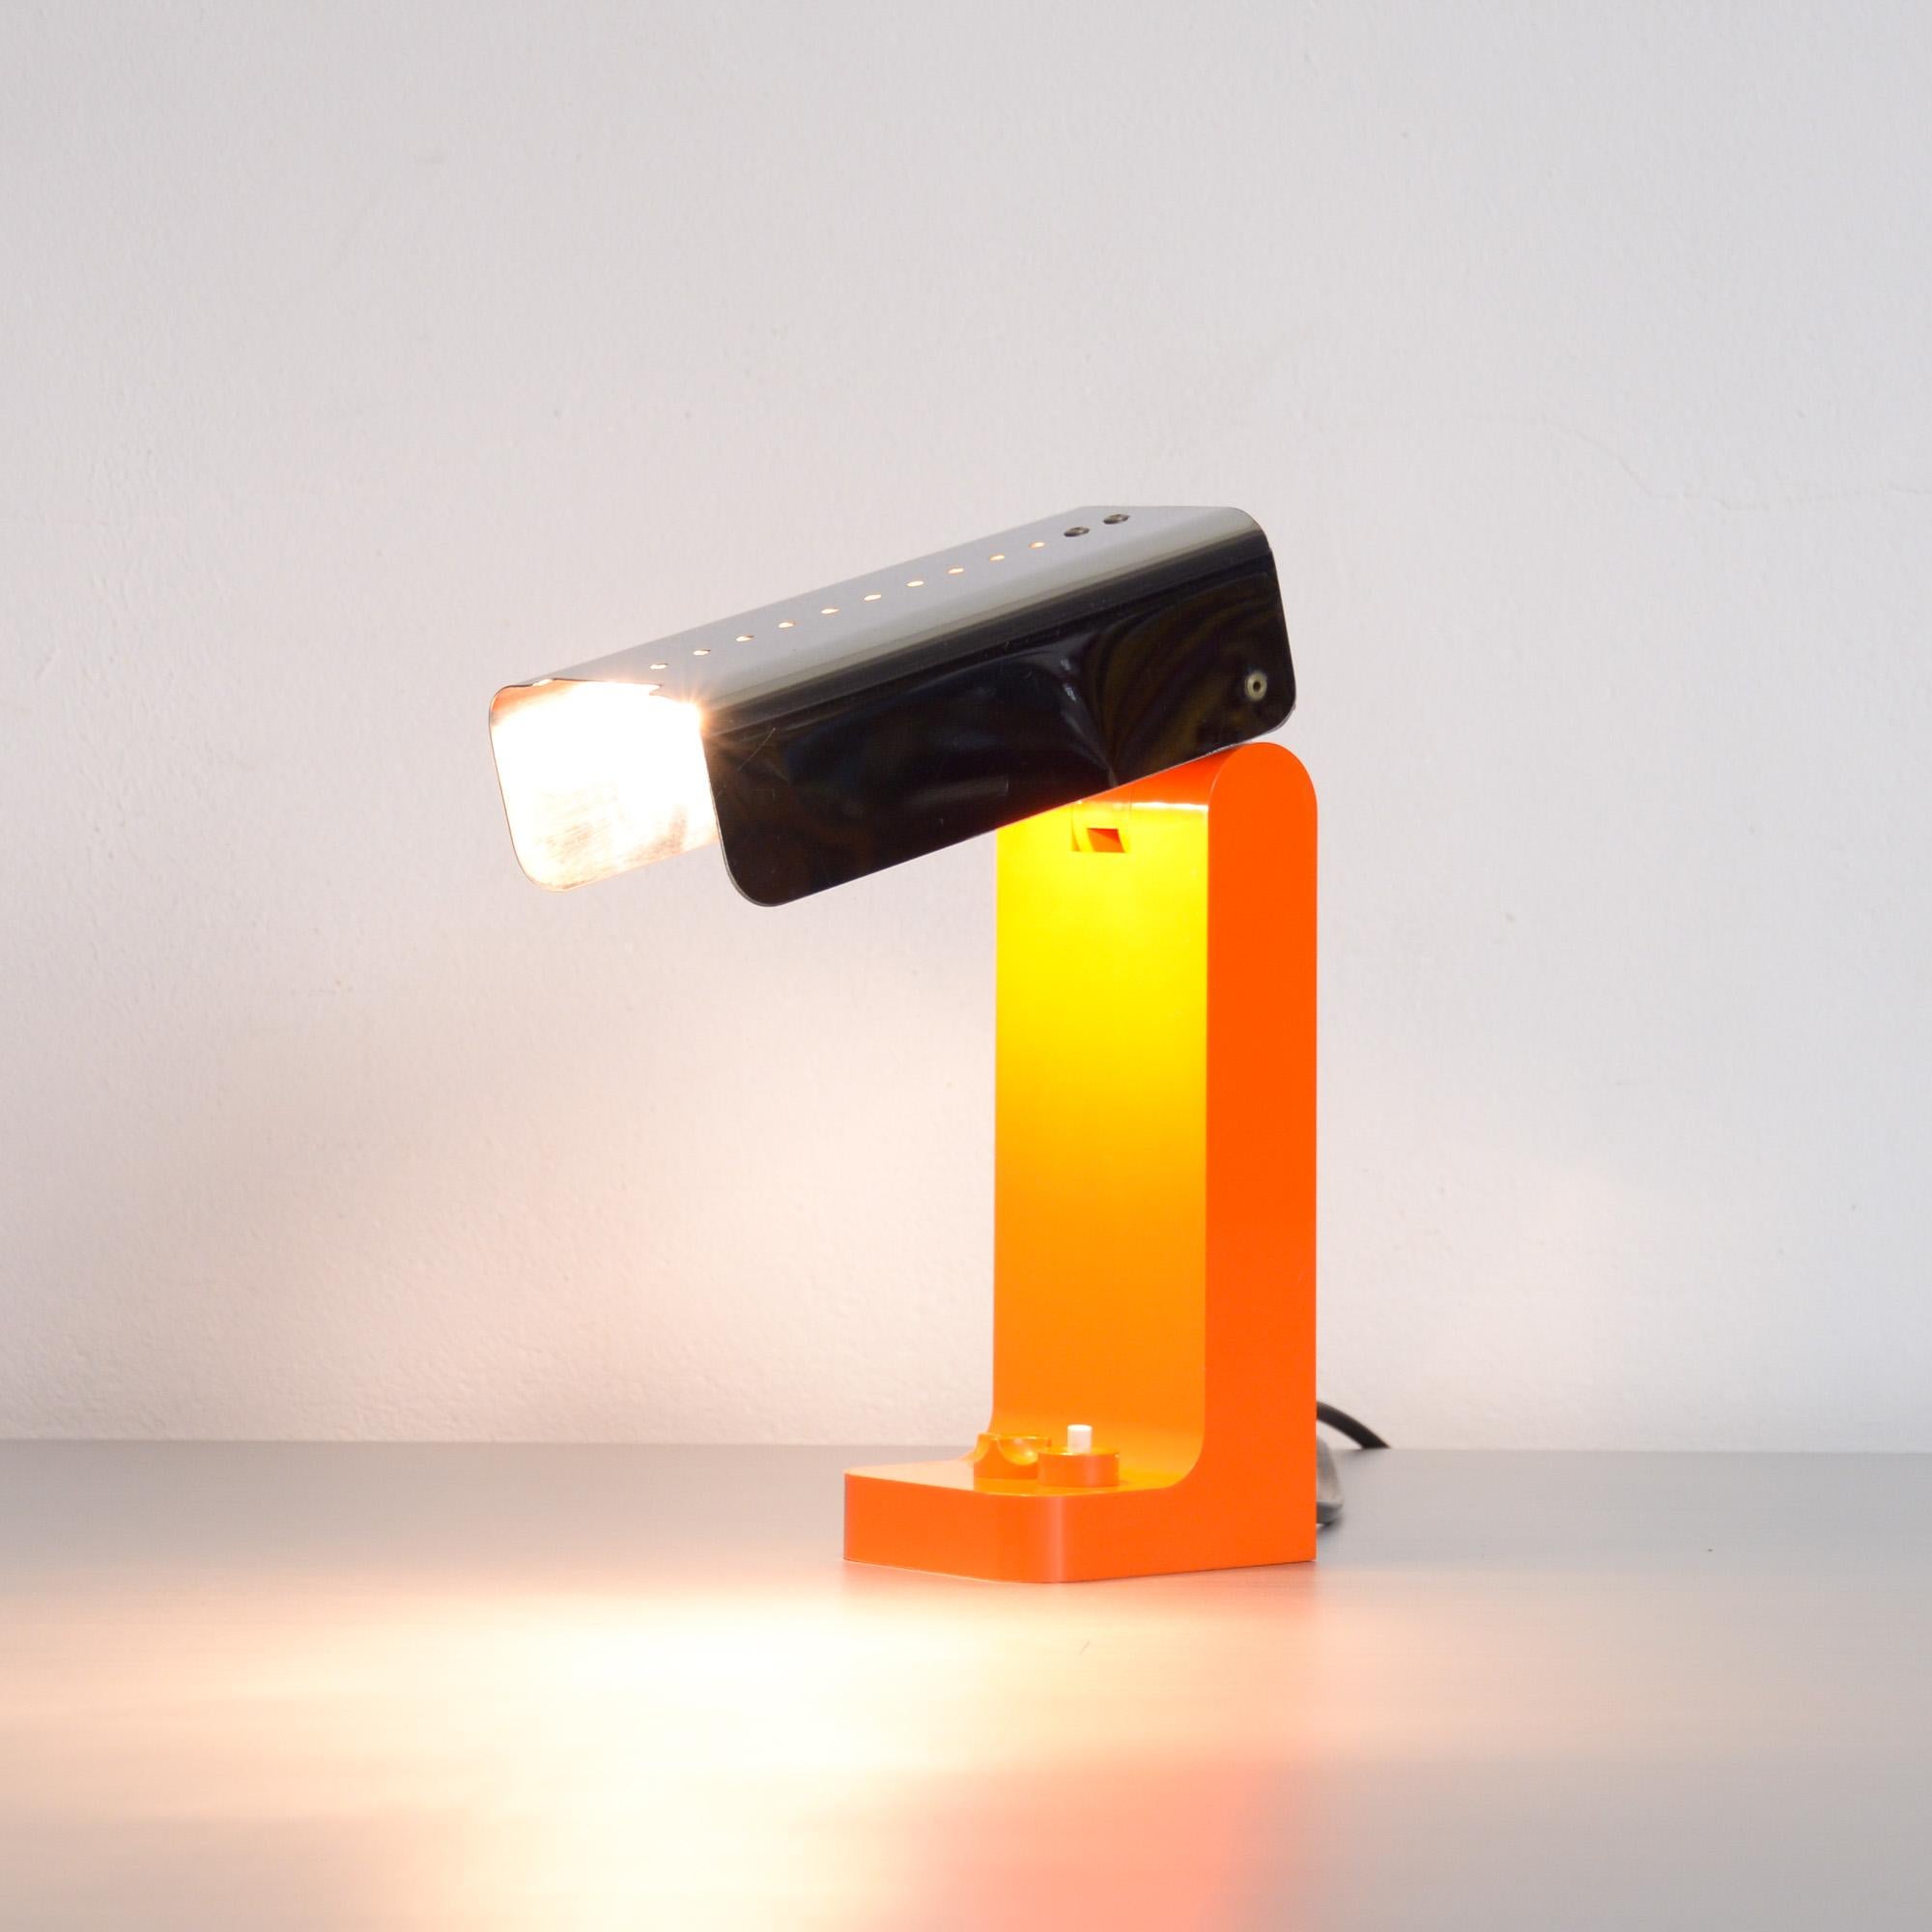 The Vademecum desk or table lamp was designed by Joe Colombo in 1968 and edited by Kartell in 1969.
The orange base is made of Cycolac plastic and the lampshade is made of stainless steel. Both parts are connected with a pole that holds the